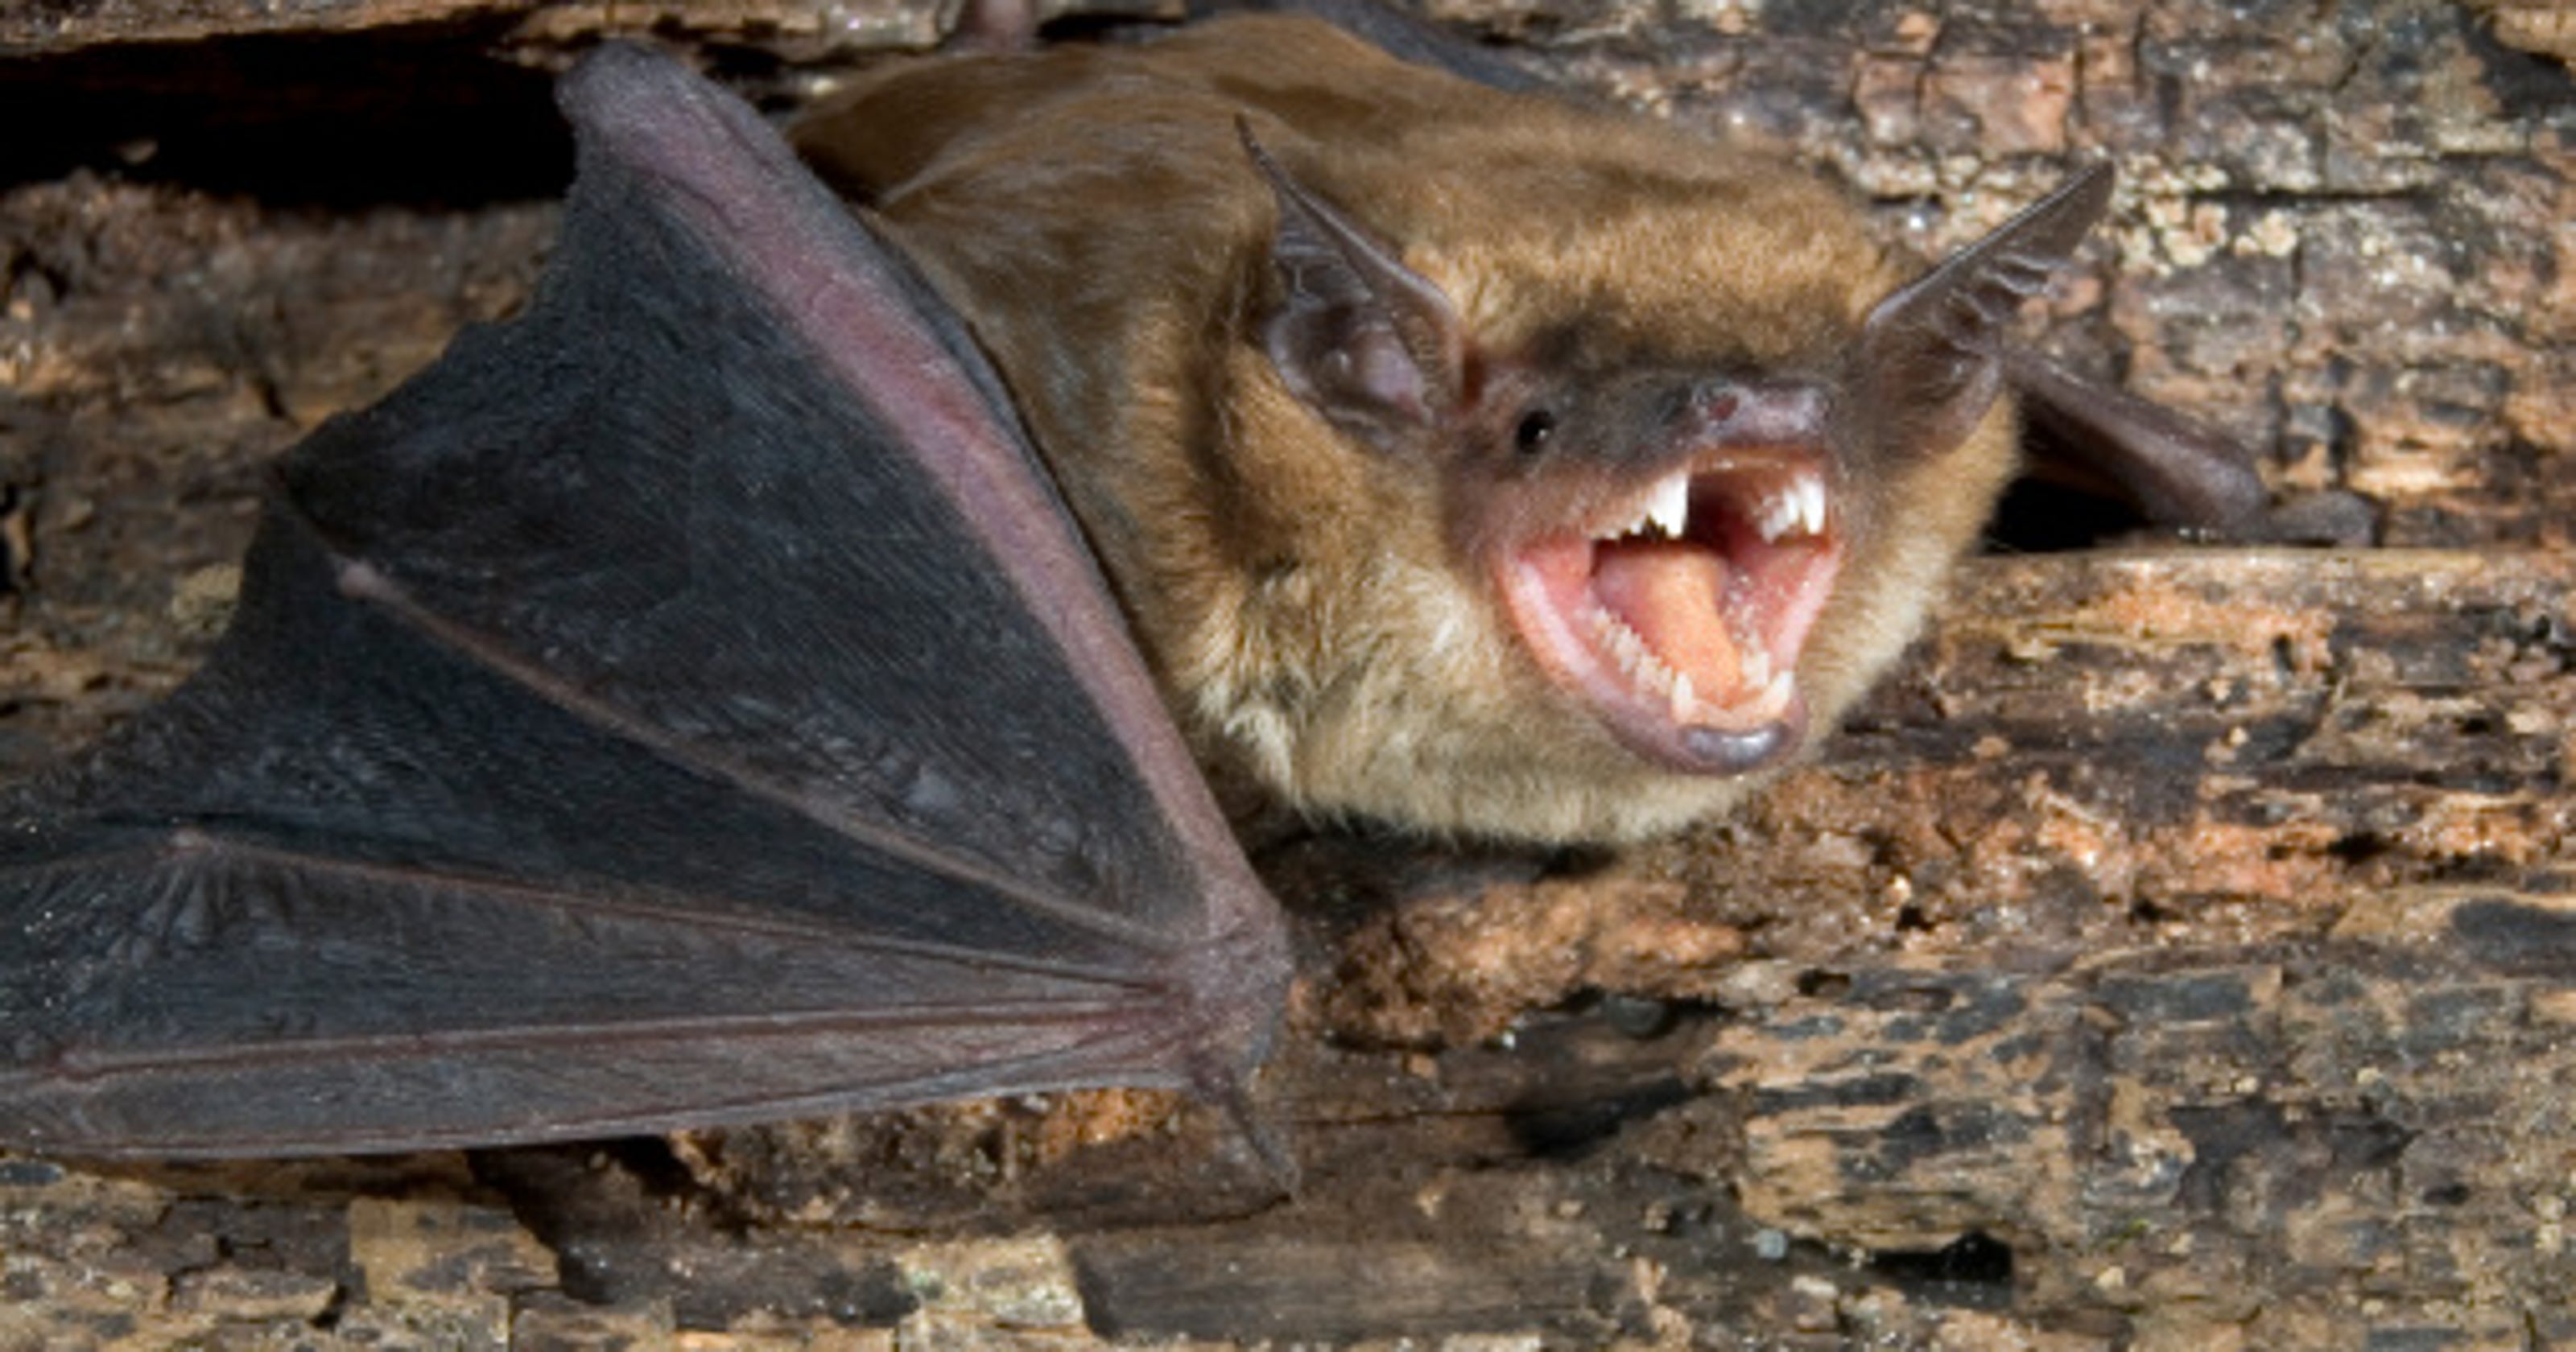 Rabid bats on rise in Michigan; how to protect family, pets